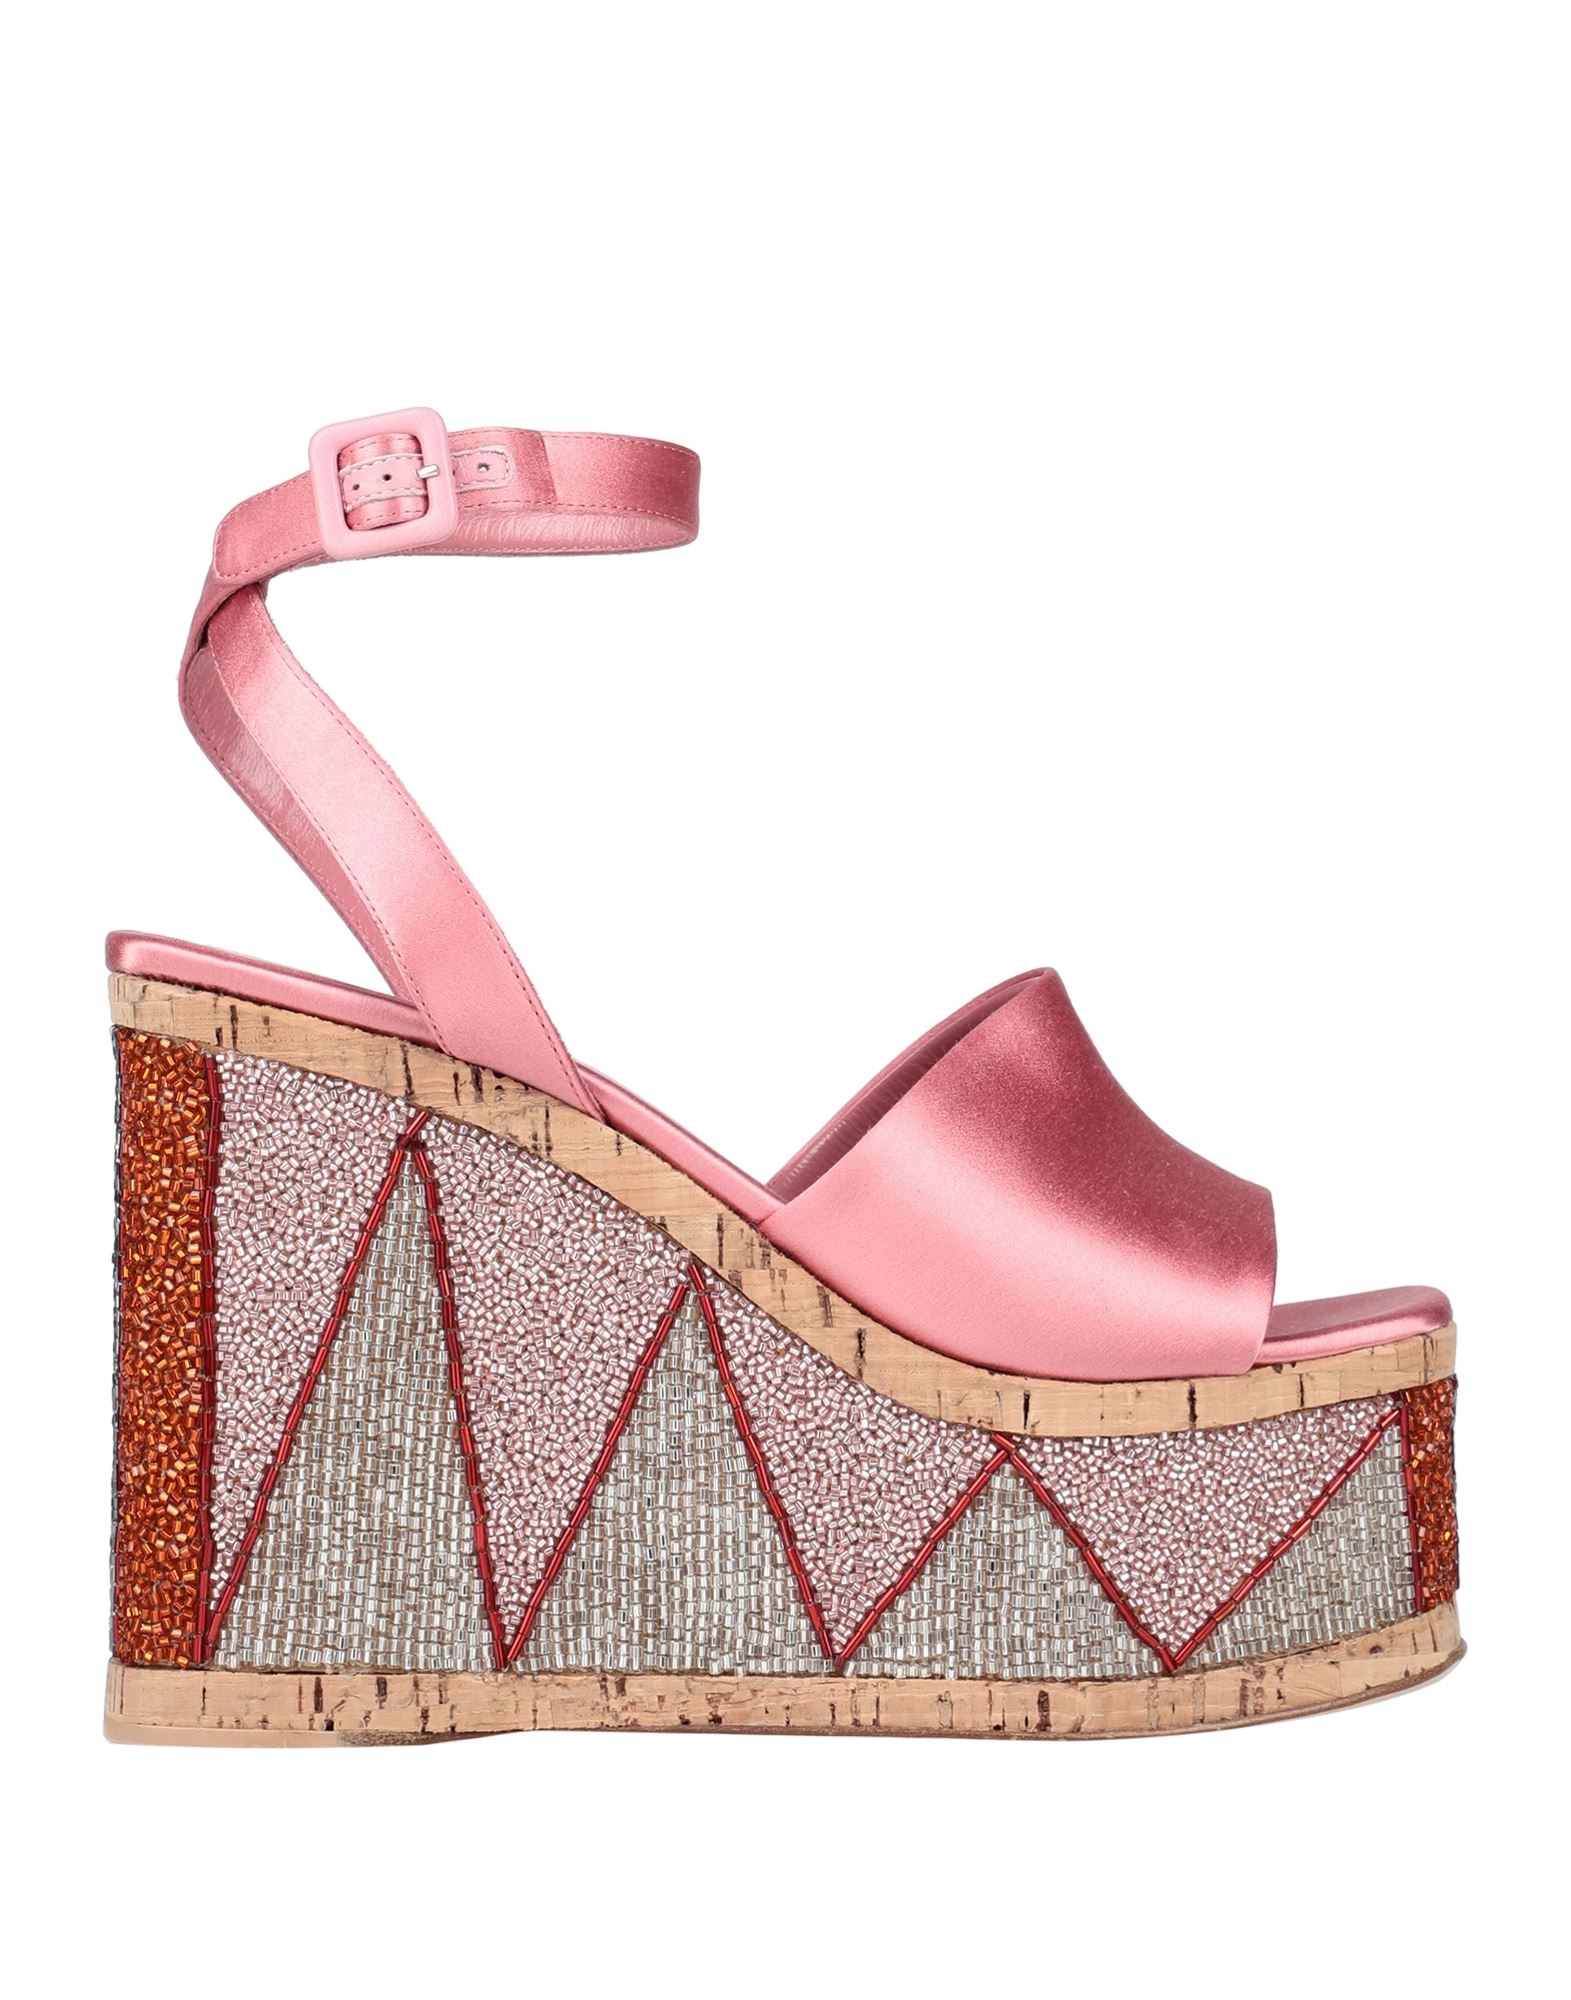 HAUS OF HONEY HAUS OF HONEY WOMAN SANDALS PINK SIZE 8 TEXTILE FIBERS, SOFT LEATHER